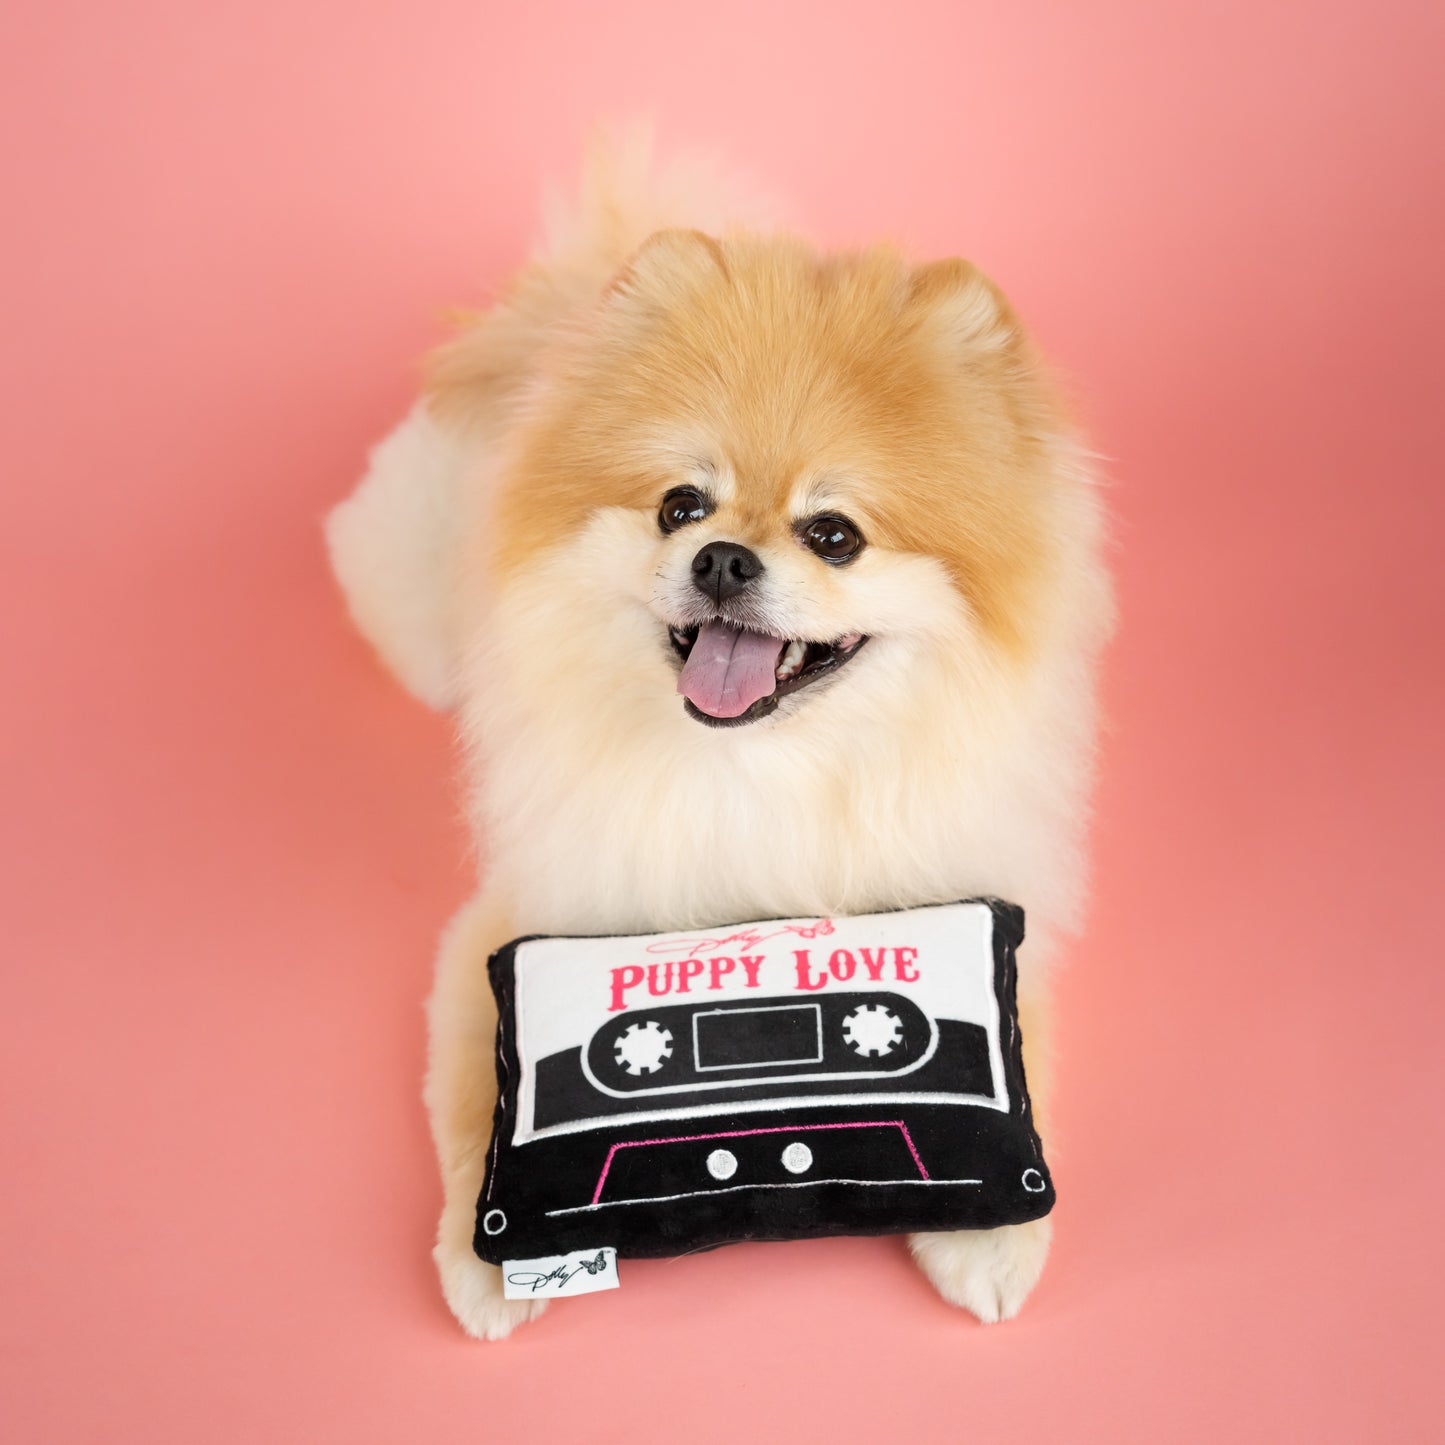 Puppy Love Cassette Tape Plush Crinkle Dog Toy